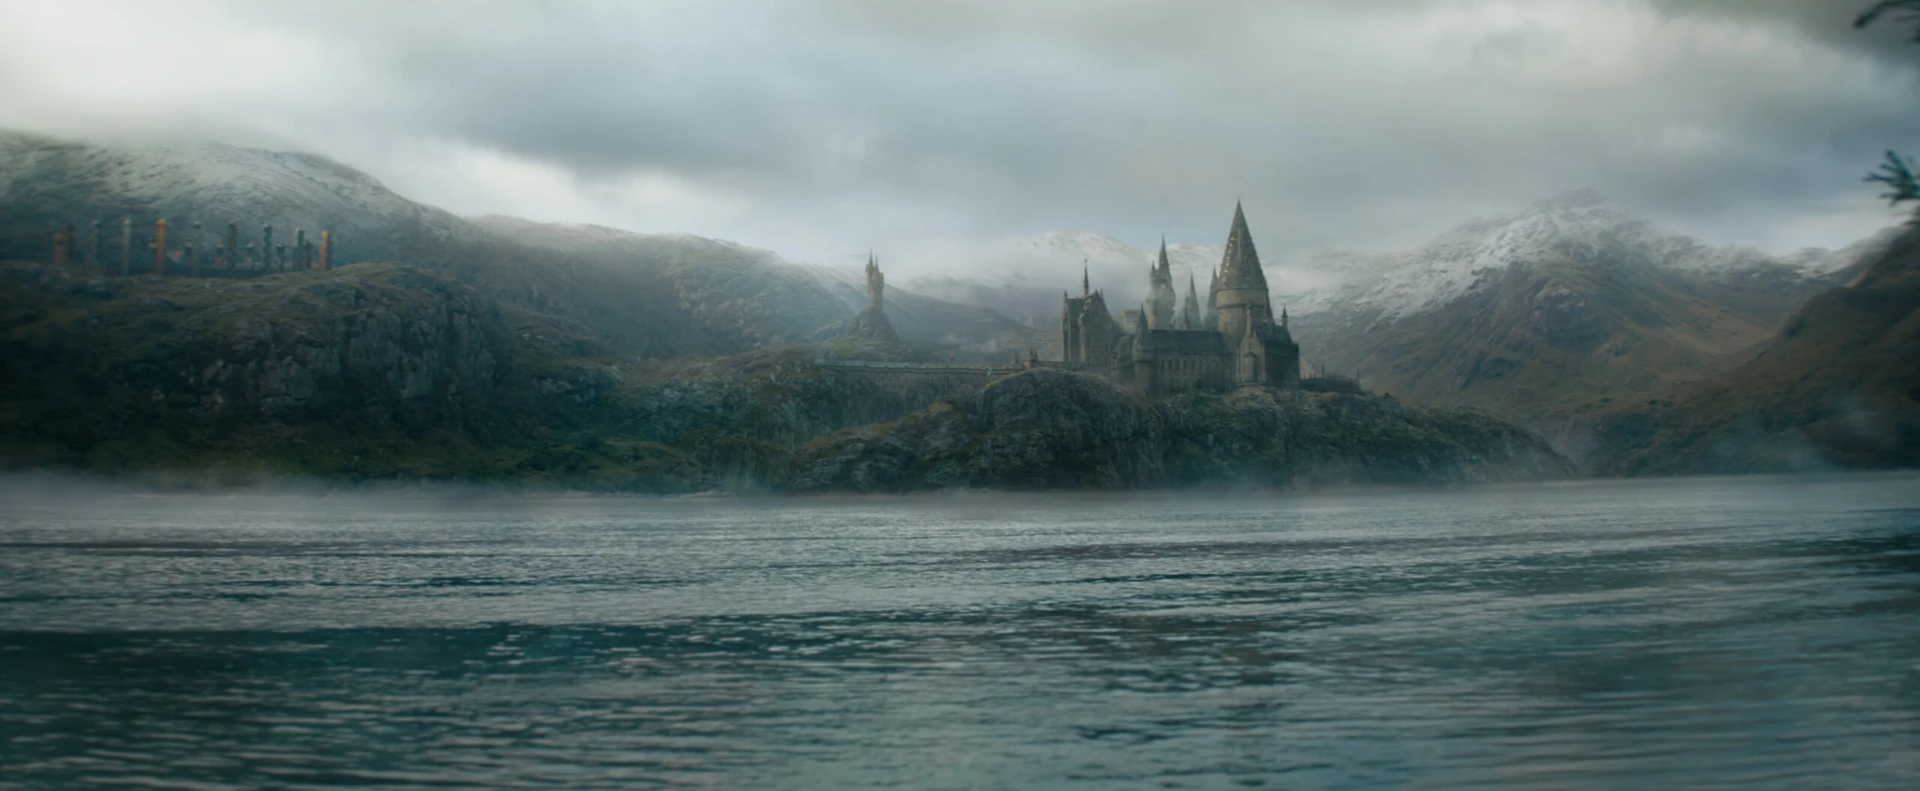 Fantastic Beasts: The Secrets of Dumbledore castle with lake in front Raynault vfx